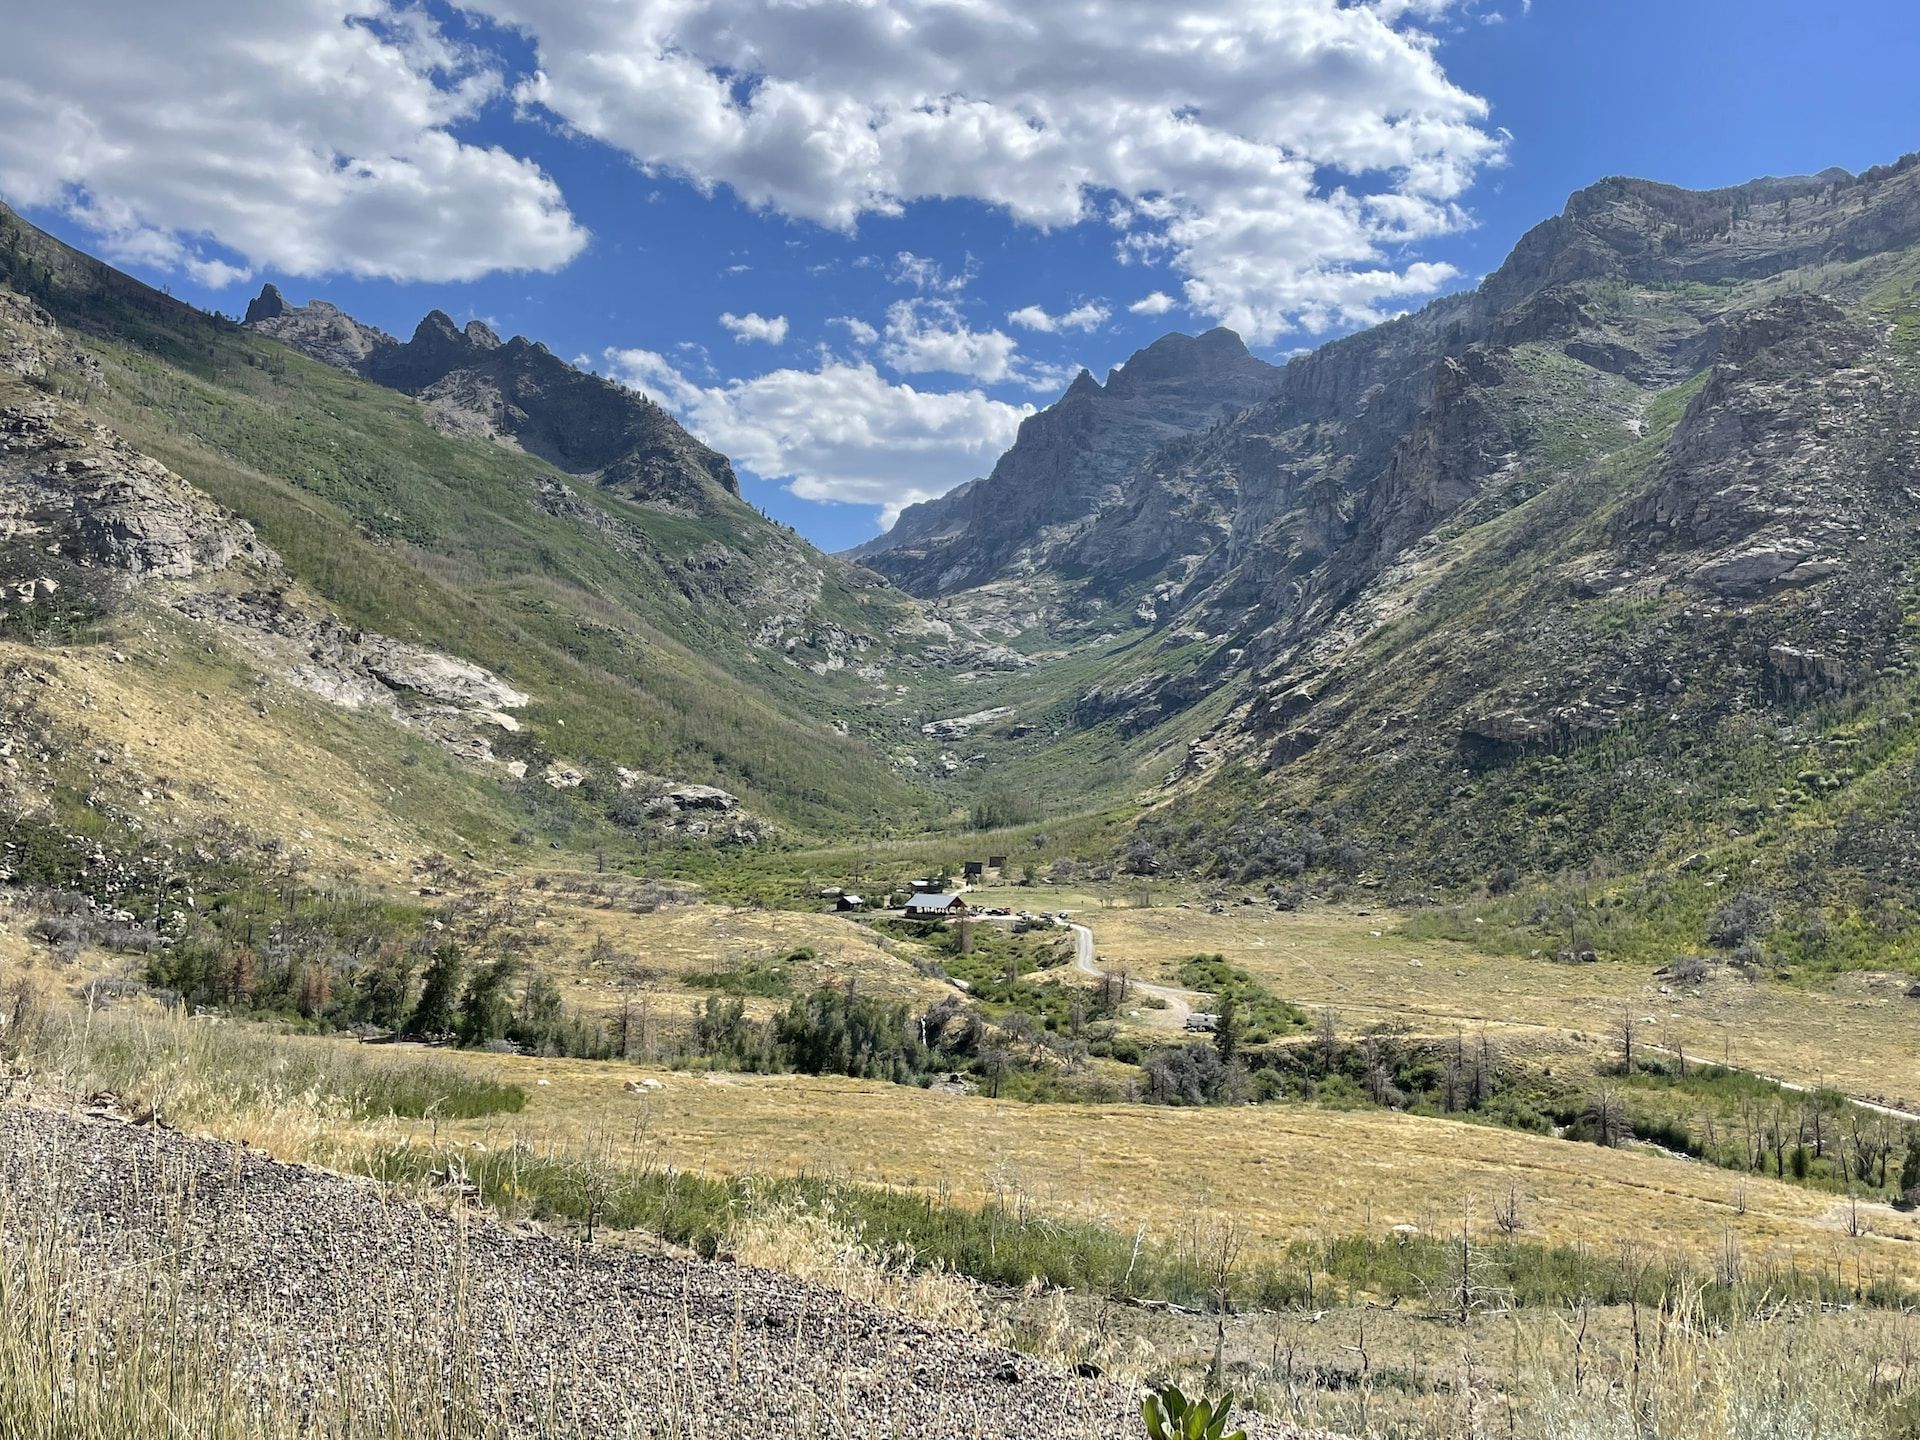 A view of the vast landscape of Lamoille Canyon near Elko, Nevada